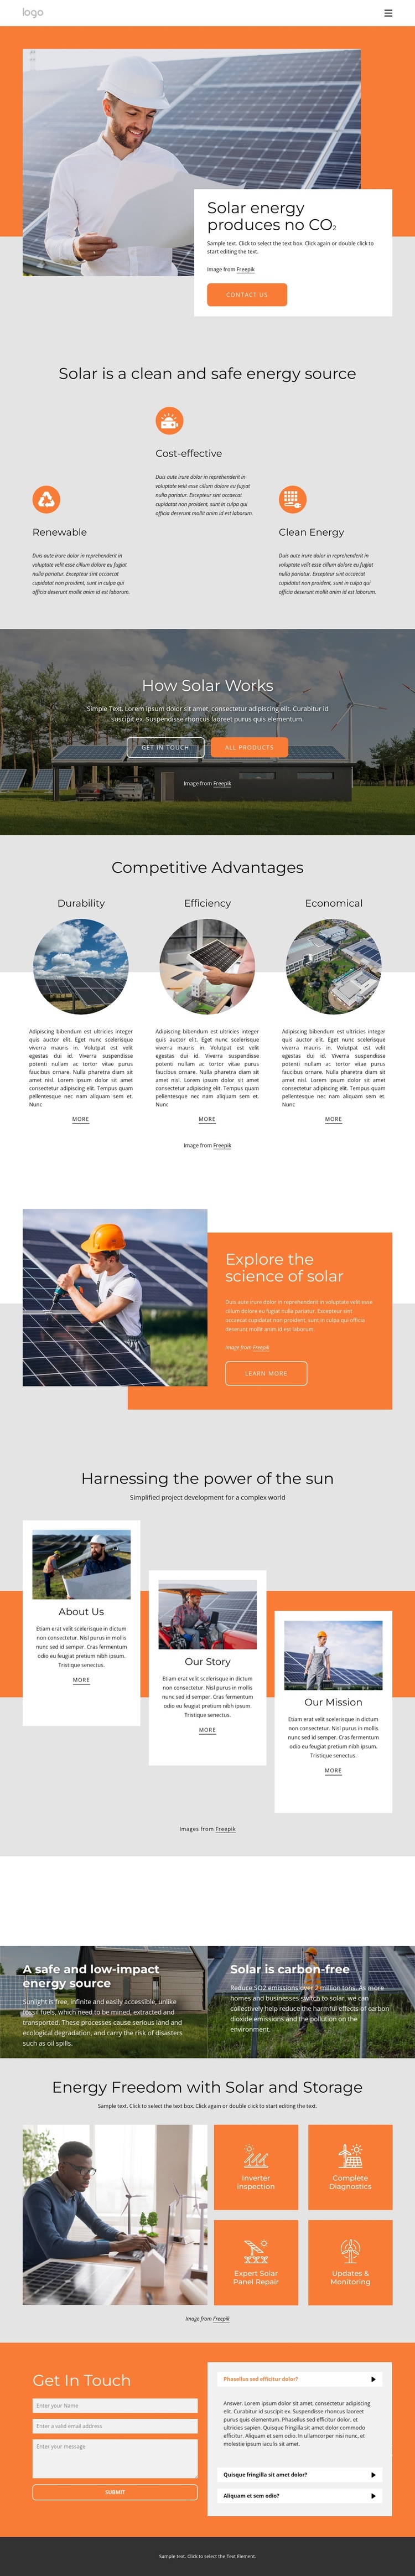 Power your home with clean solar energy Website Builder Software